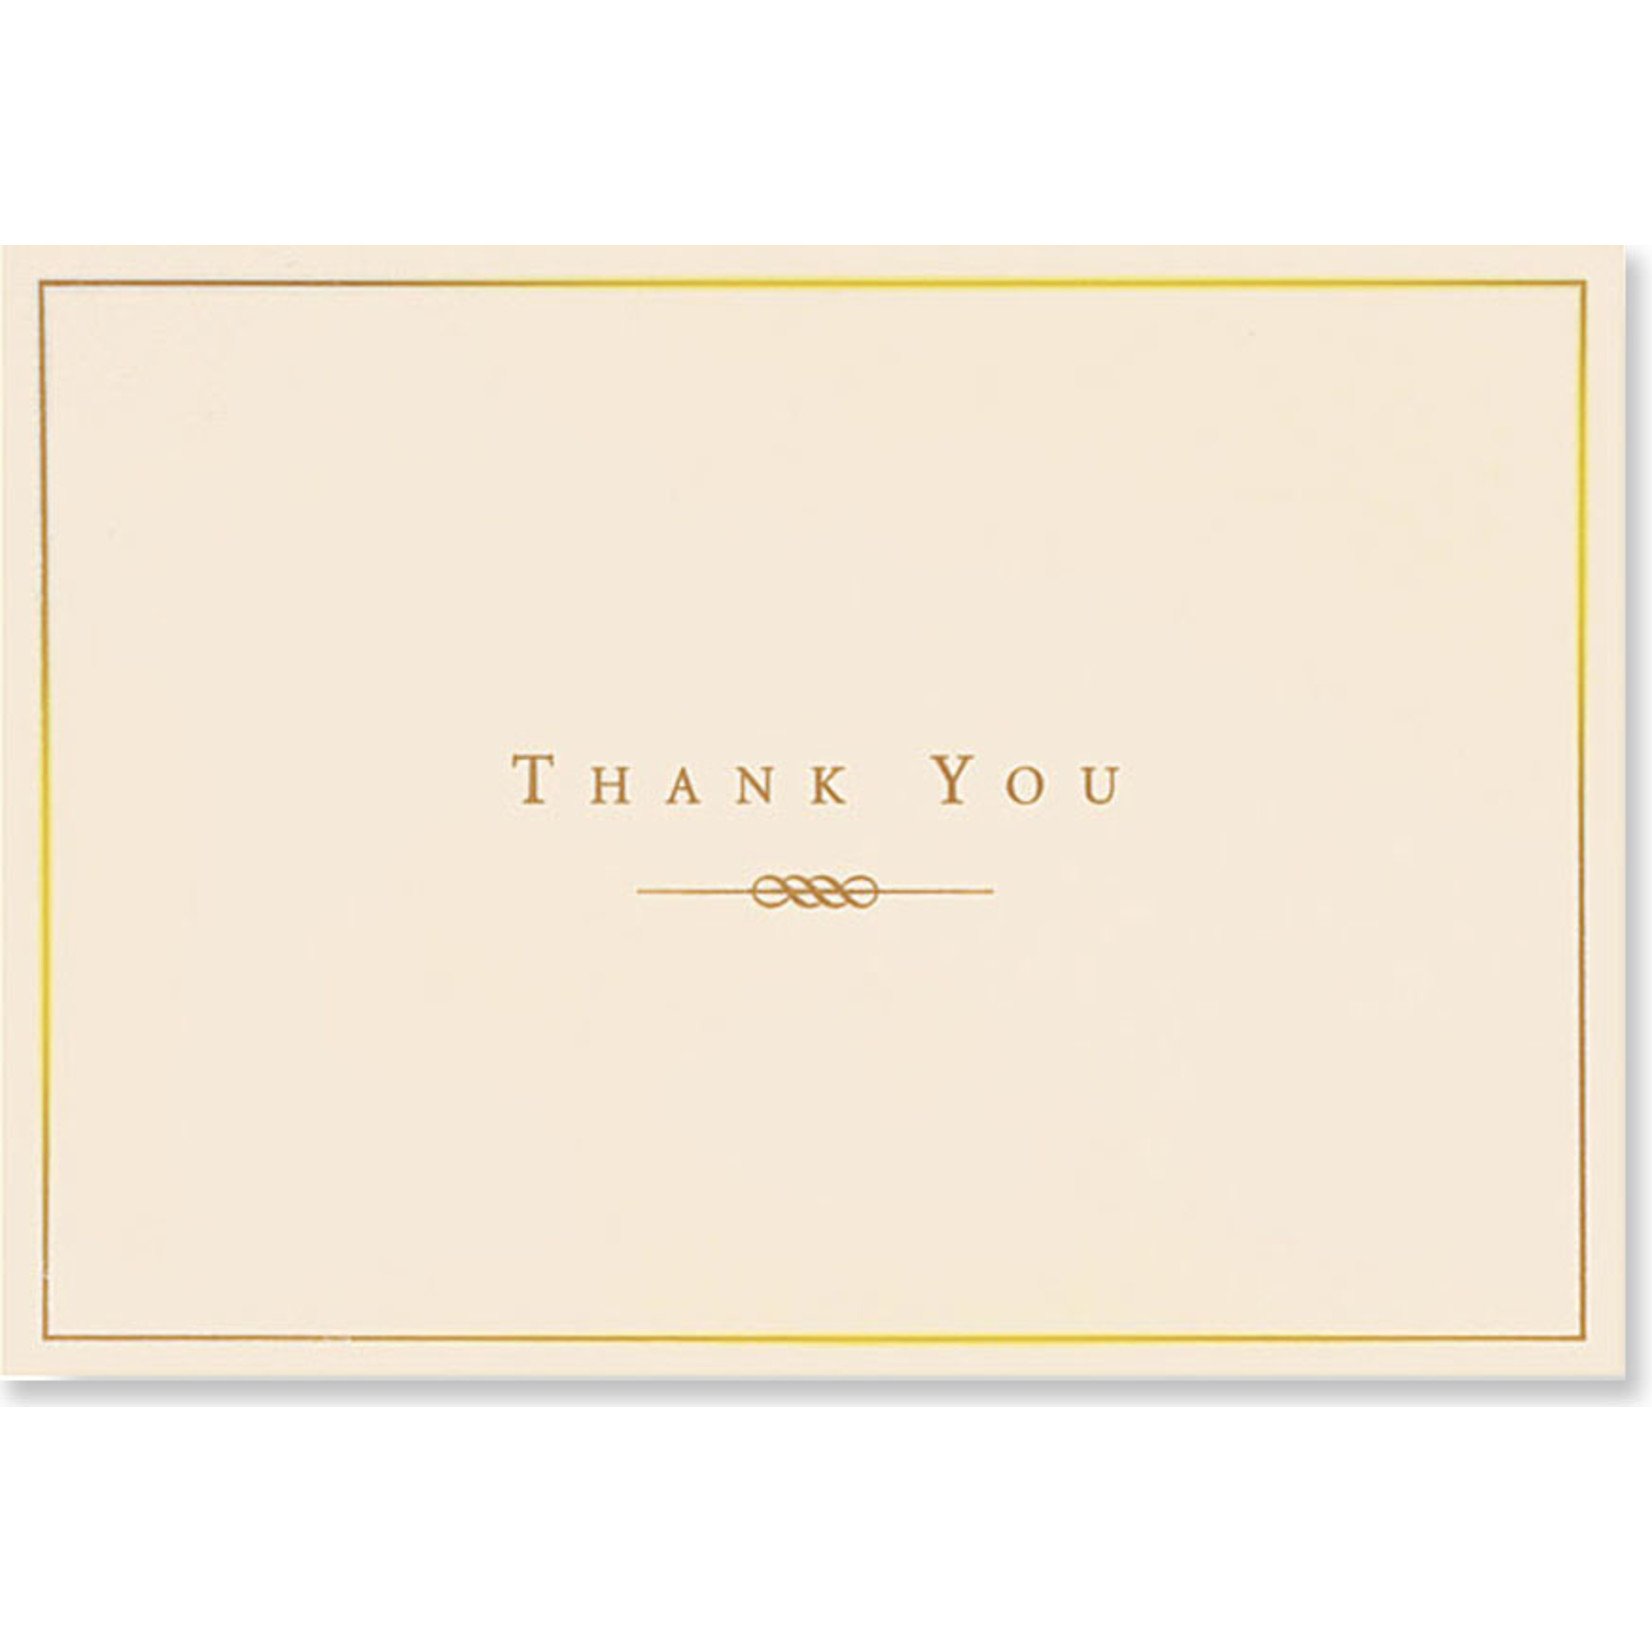 Boxed Thank You Cards: Gold/Cream